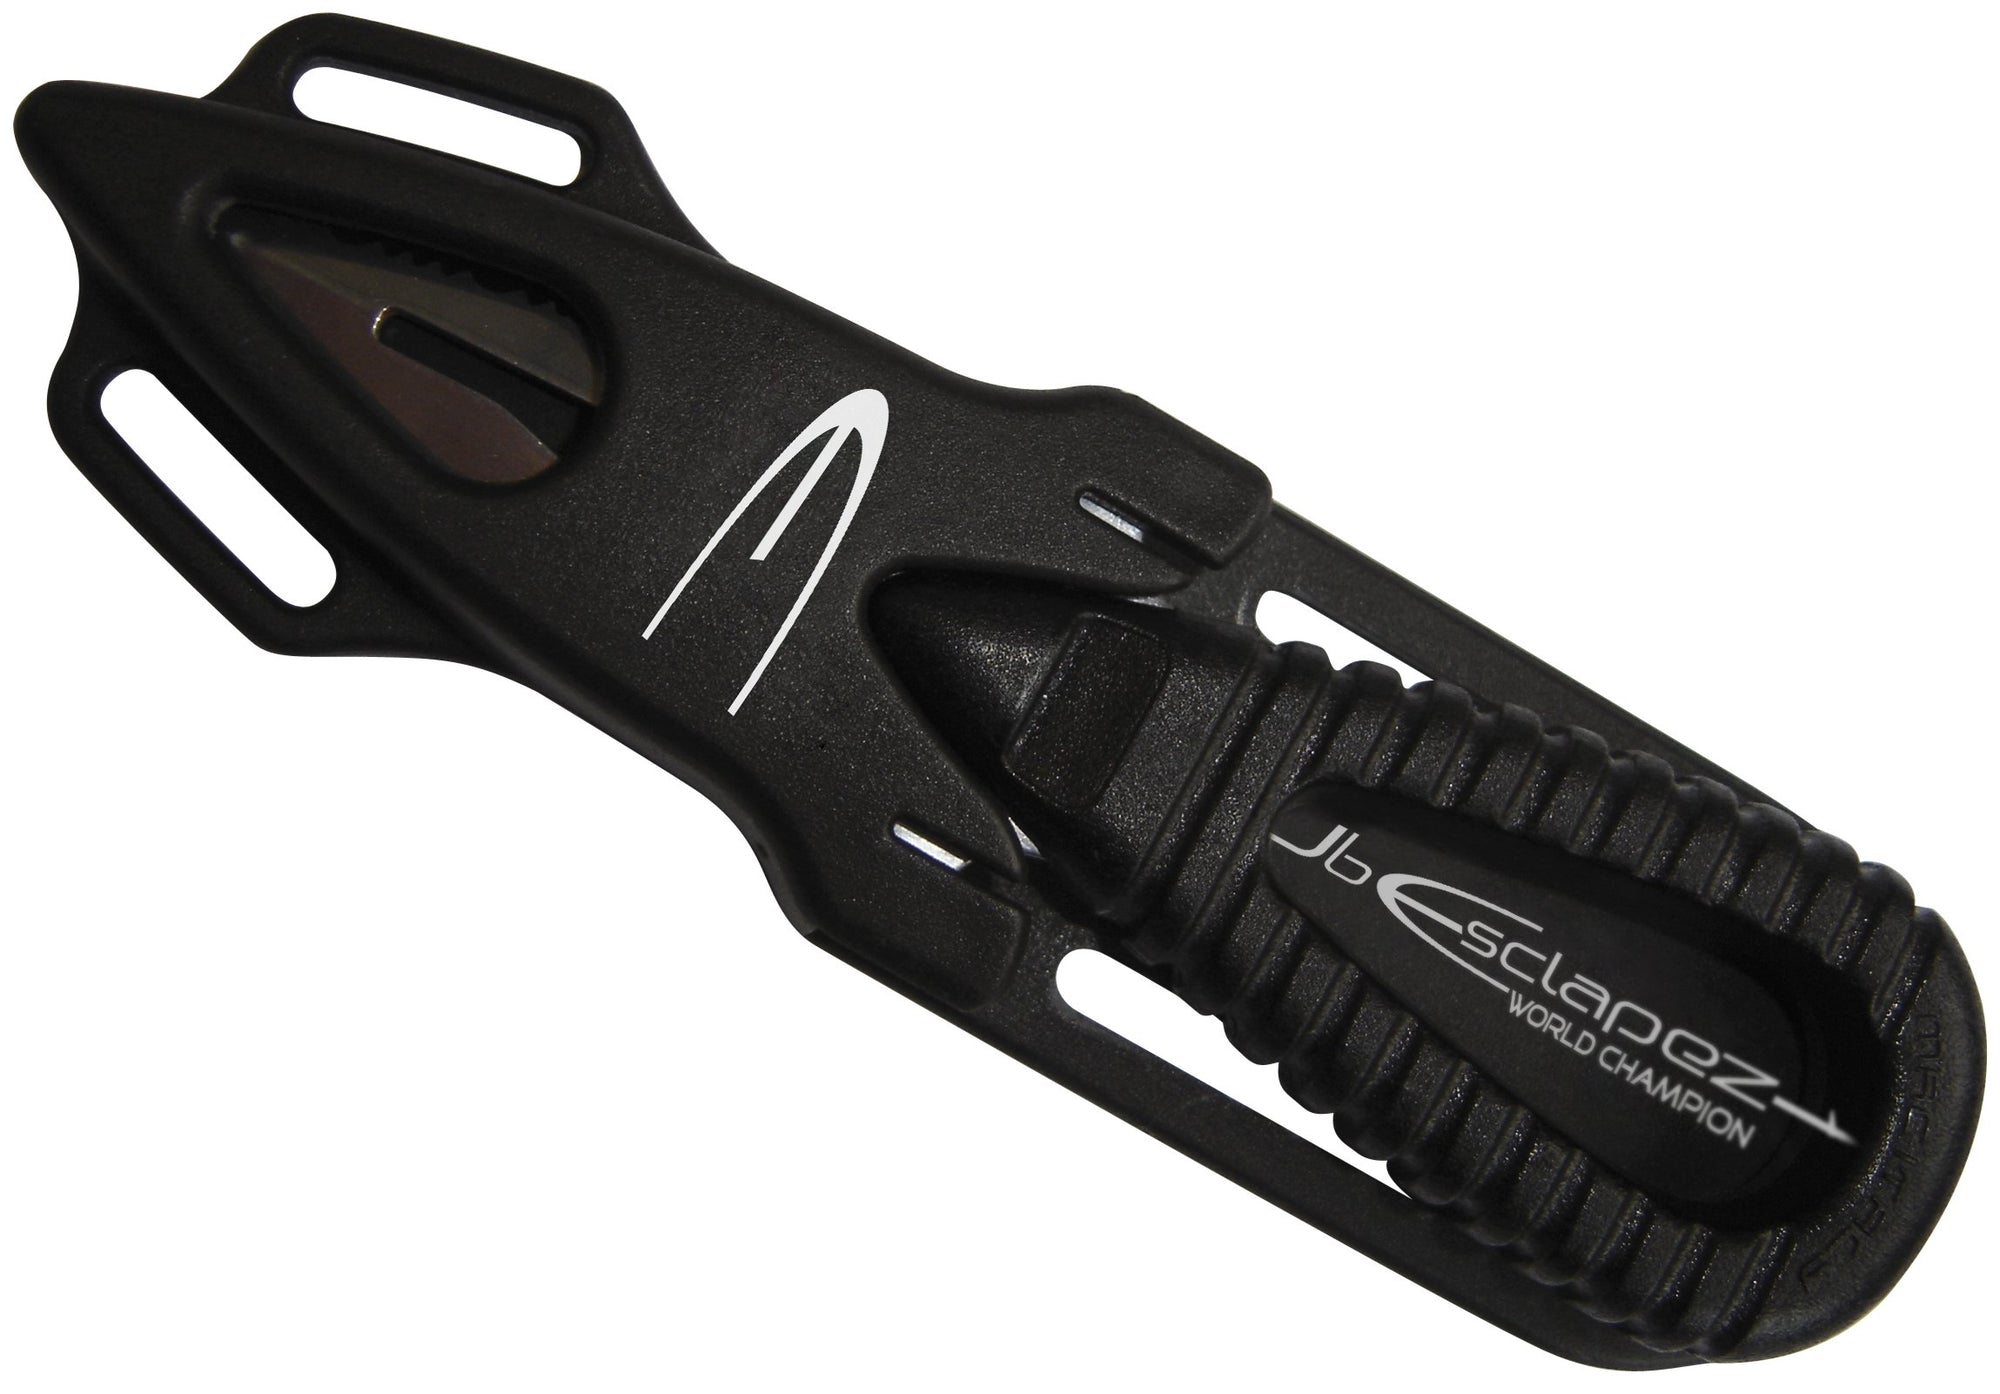 SpearPro Microsub TC Stainless Steel Dive Knife - Spearfishing Experts